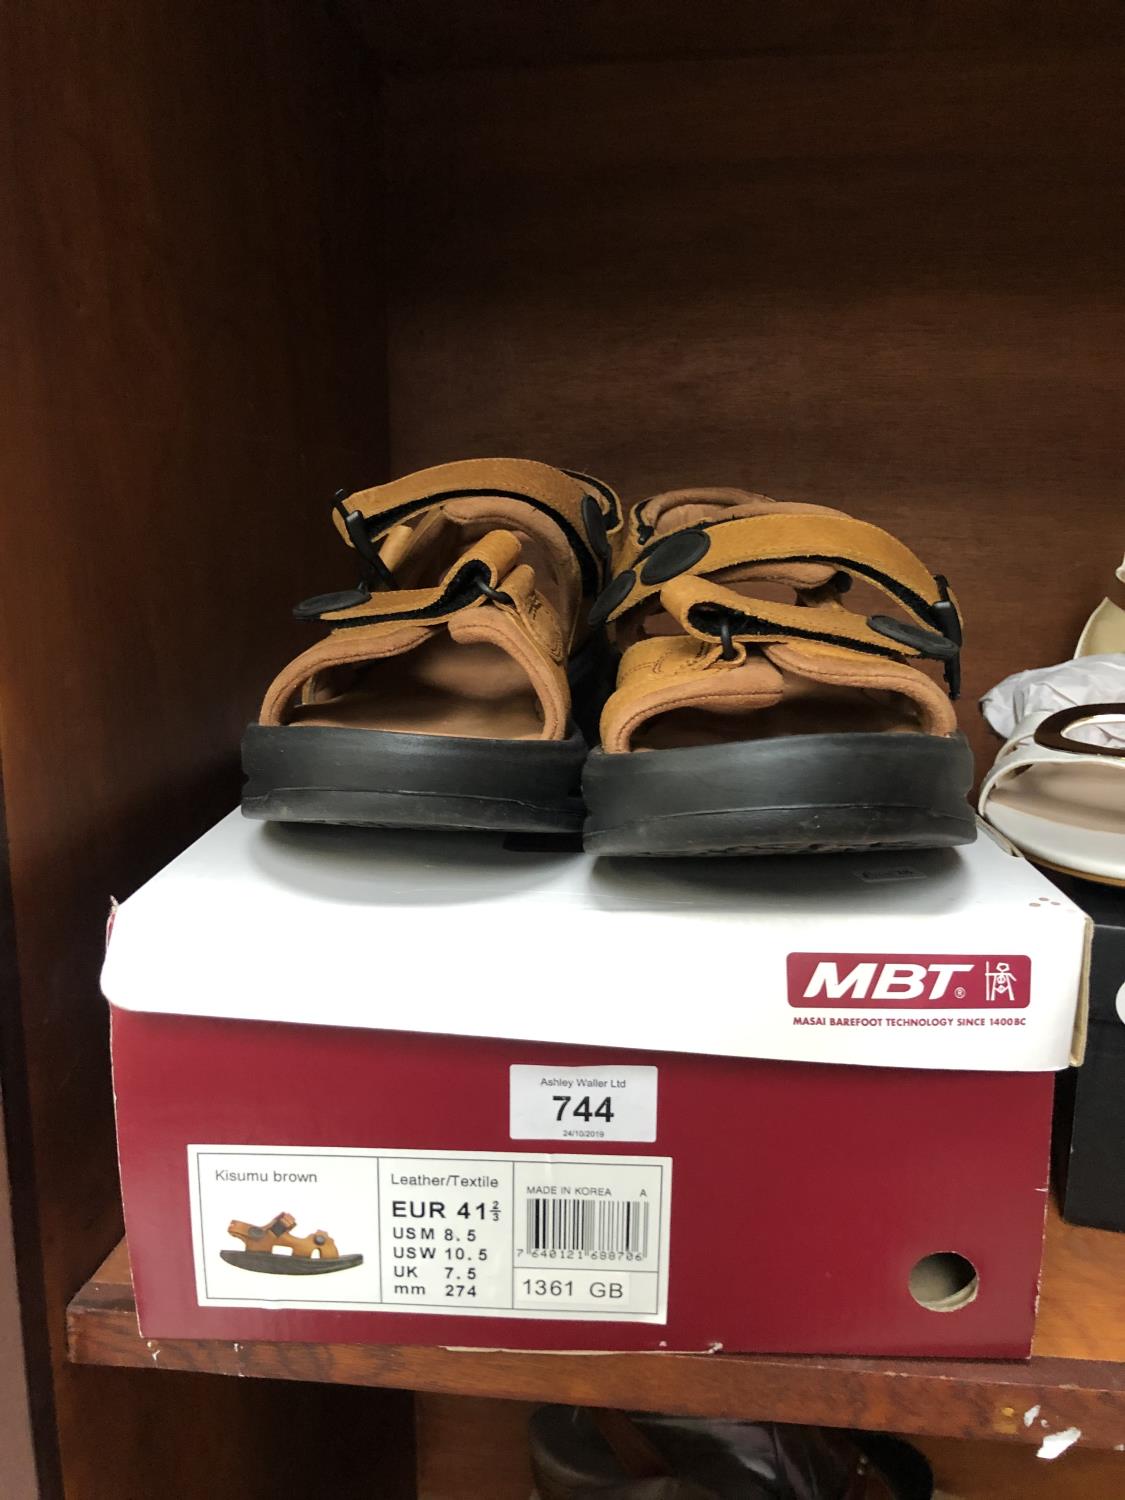 A BOXED PAIR OF M.B.T SANDALS, UK SIZE 7.5